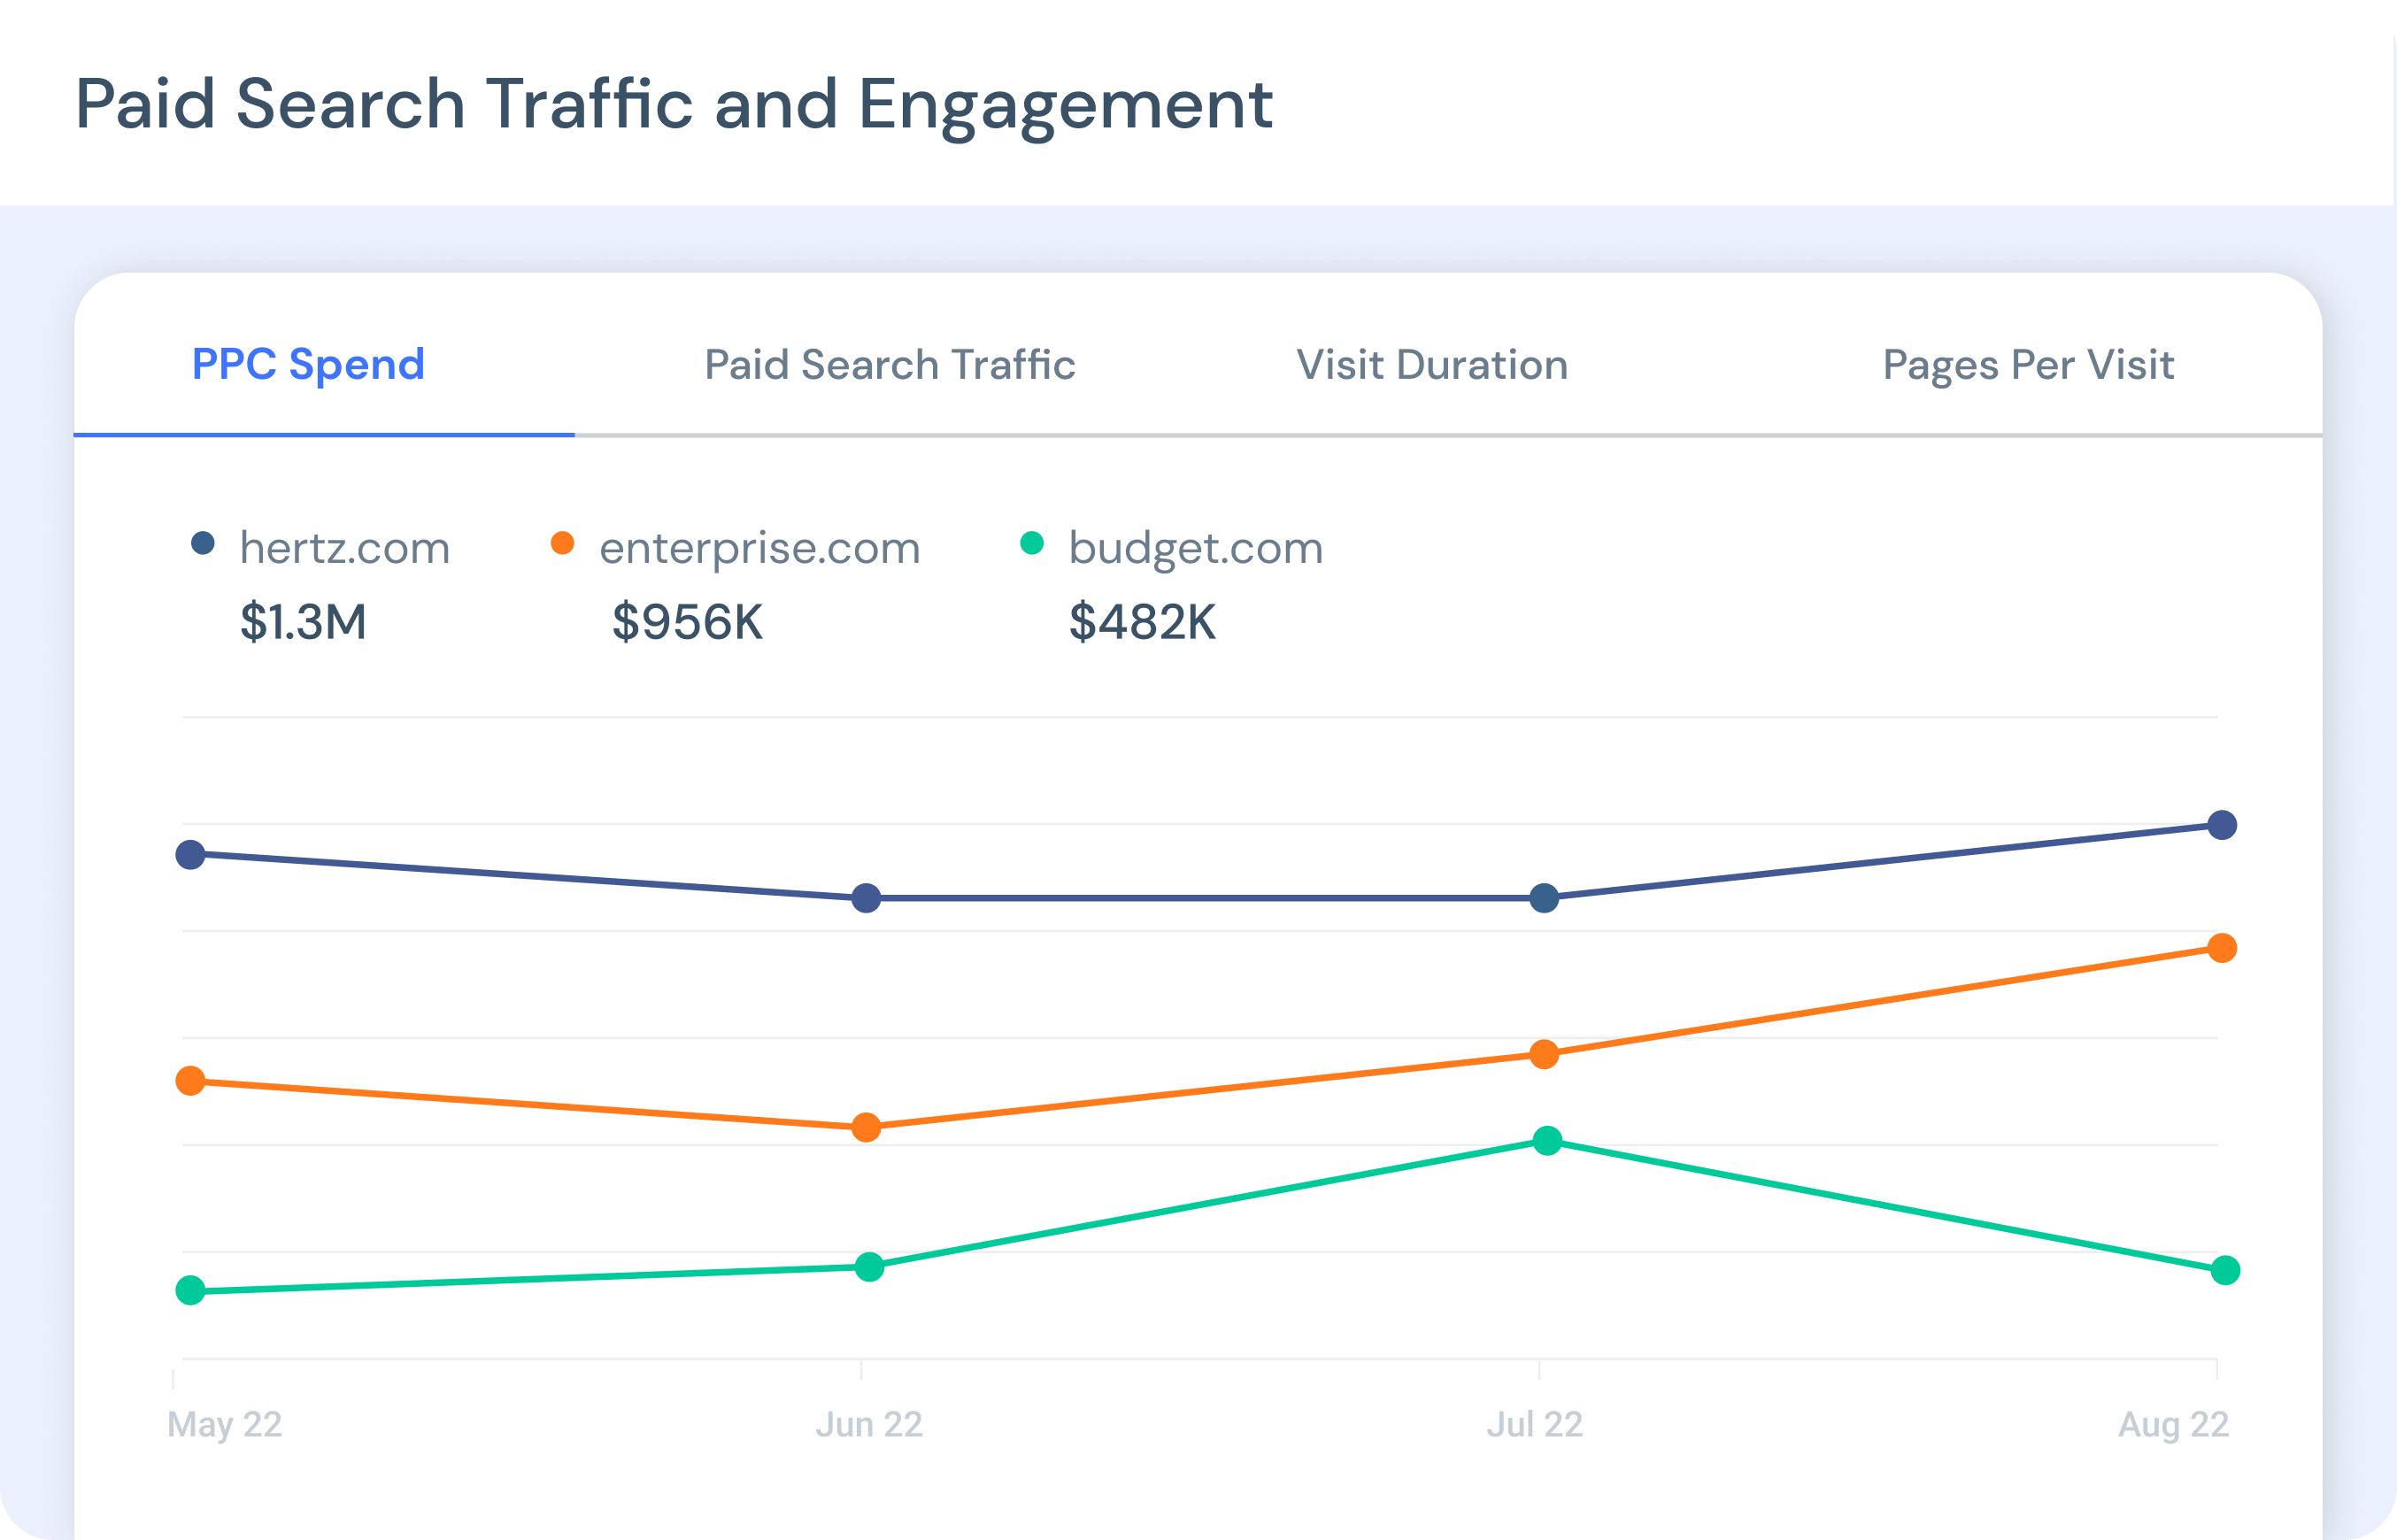 Paid search traffic and engagement